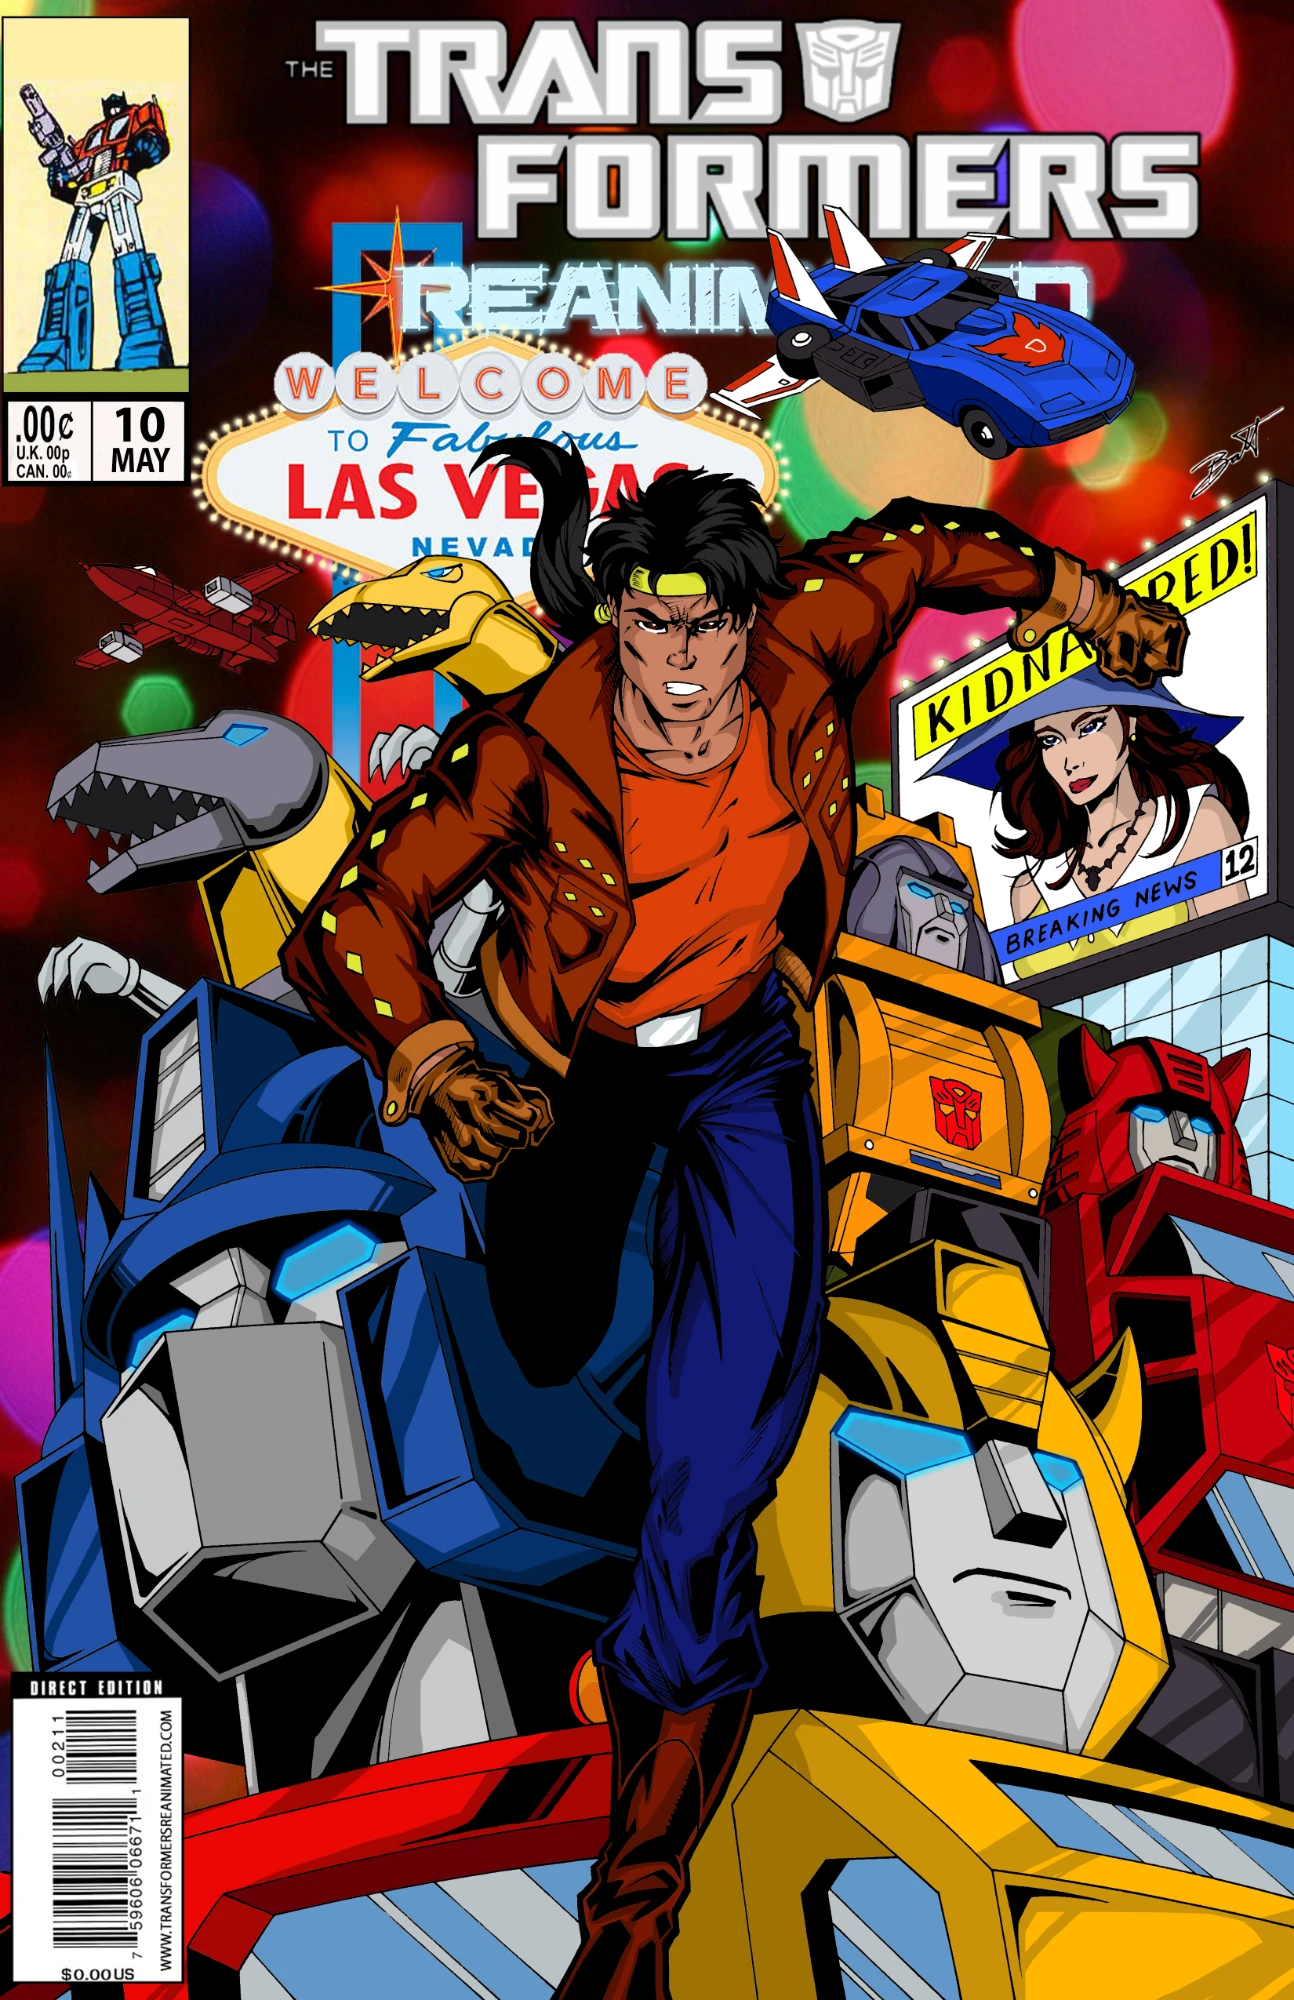 Transformers comic cover depicting the Autobot is Las Vegas